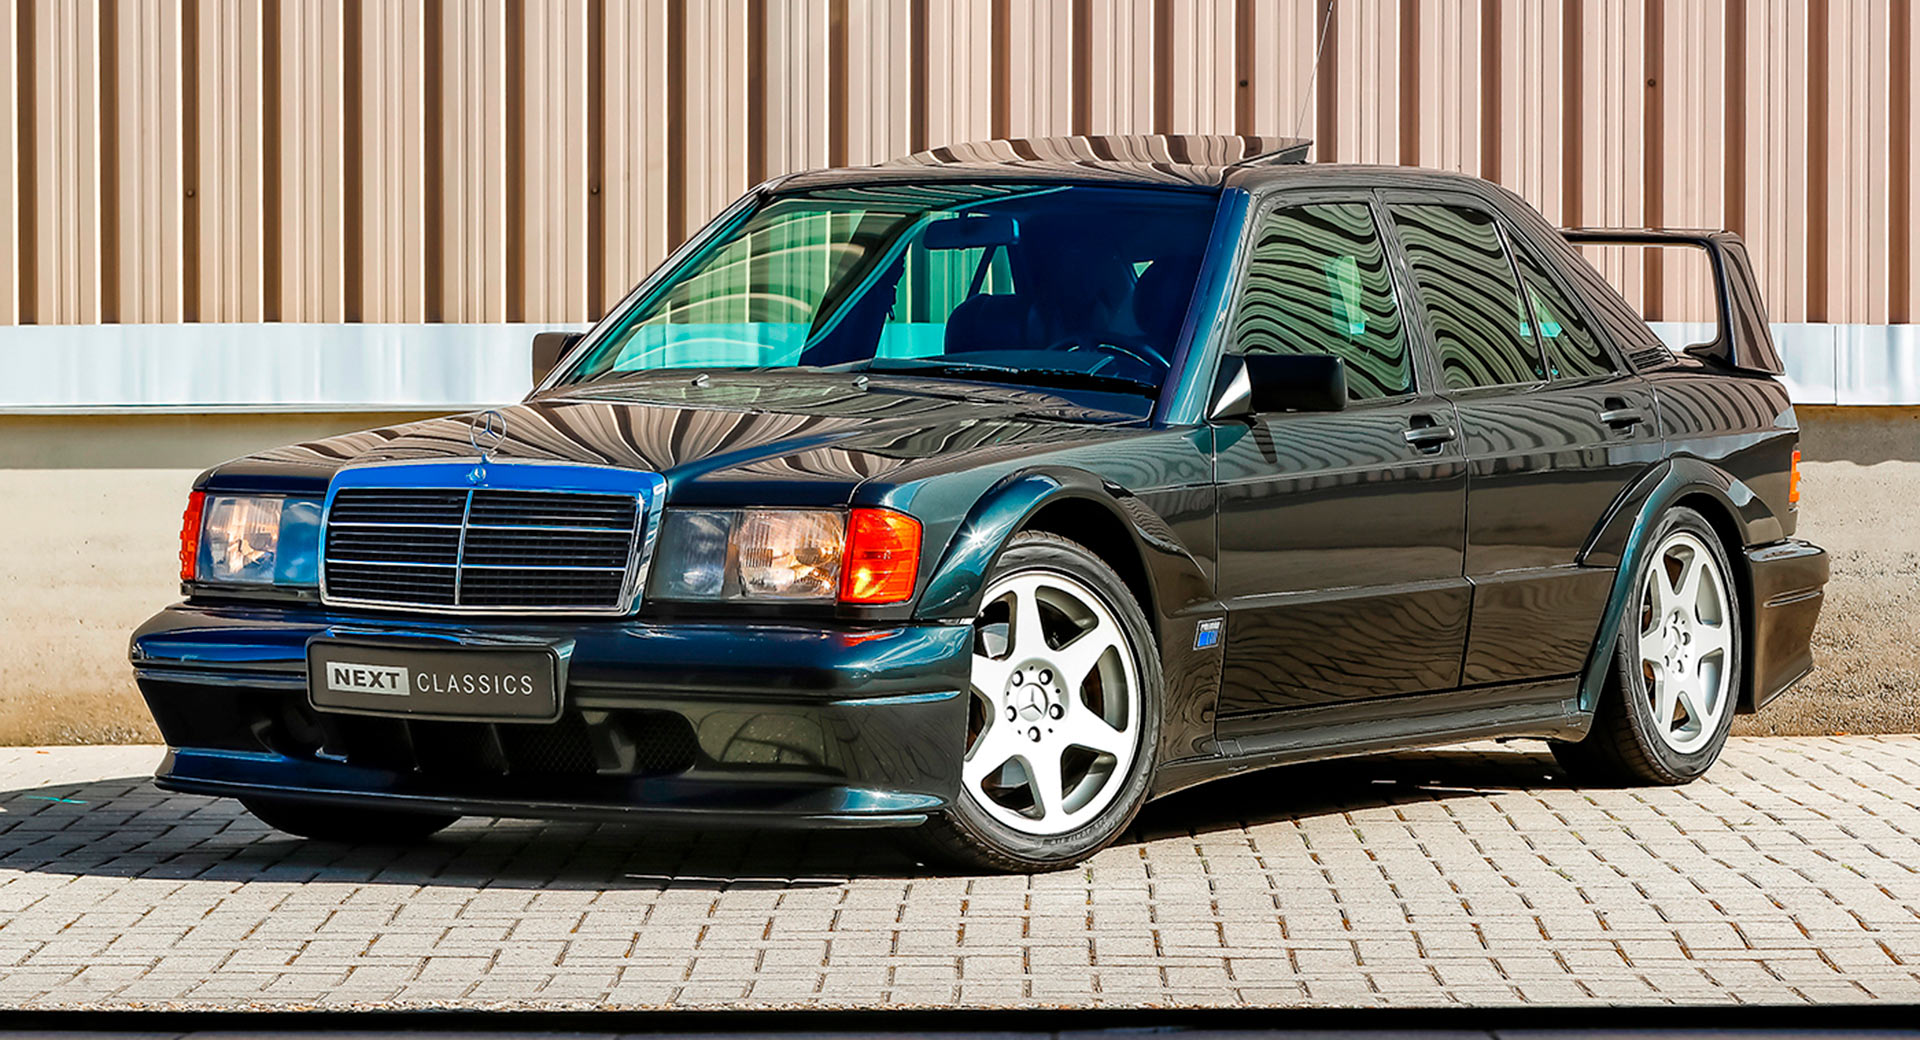 vervolging drinken majoor There Are Just 502 Mercedes-Benz 190E 2.5-16 Evo II's Like This On Earth |  Carscoops